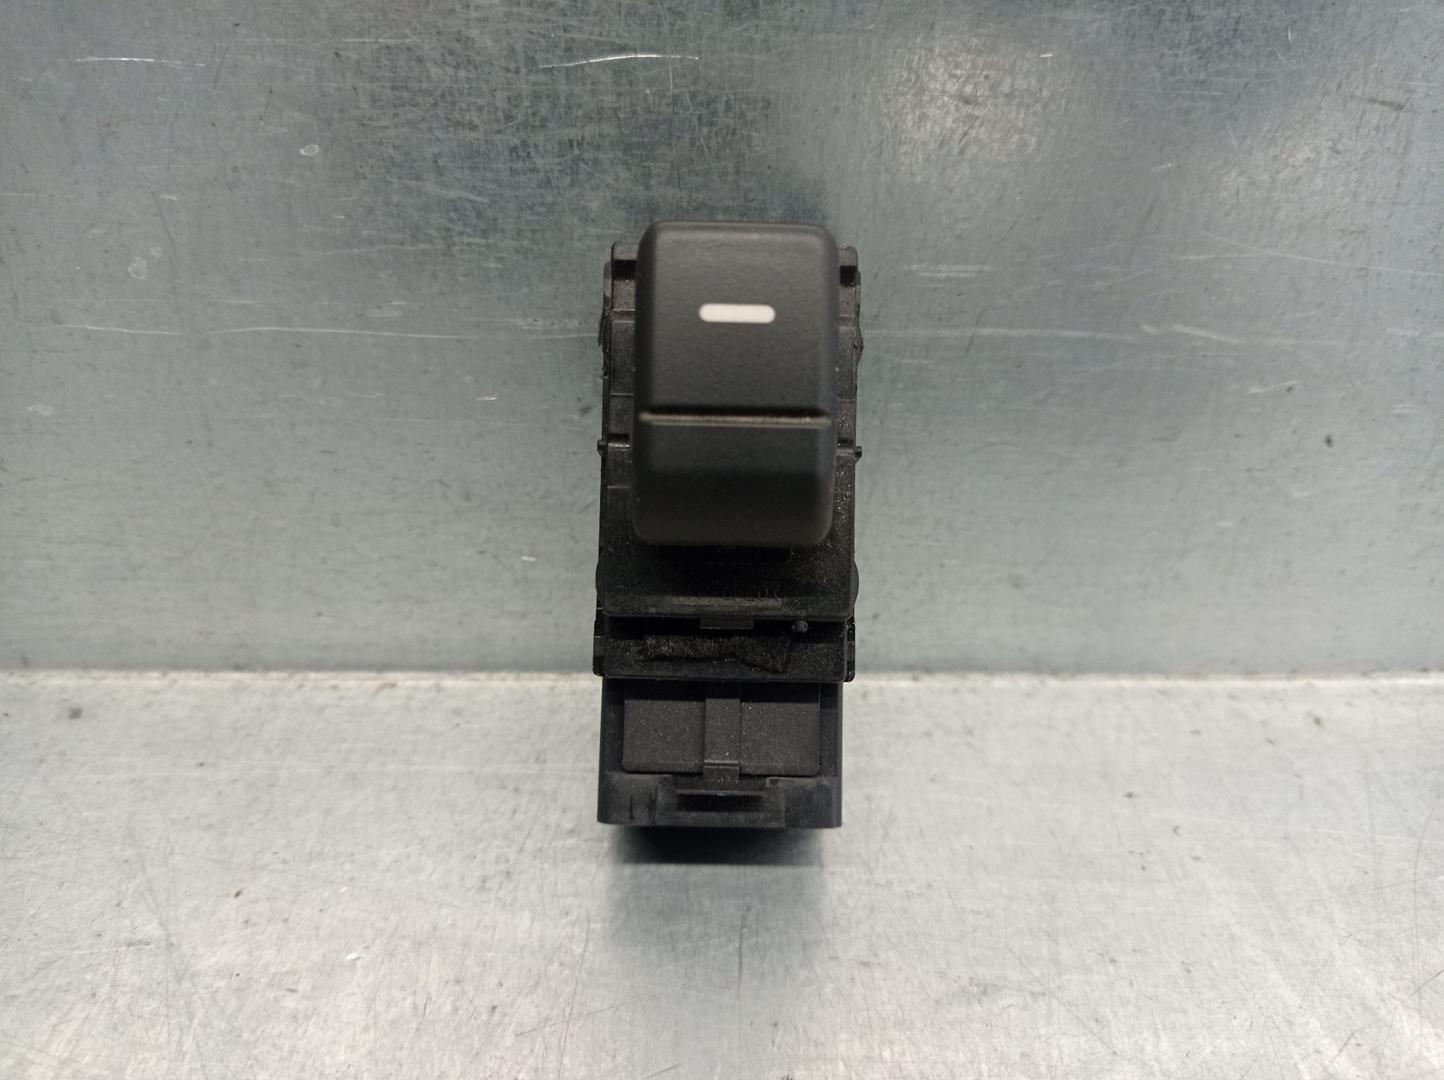 LAND ROVER Discovery 4 generation (2009-2016) Rear Right Door Window Control Switch YUD501070PVJ 19818845